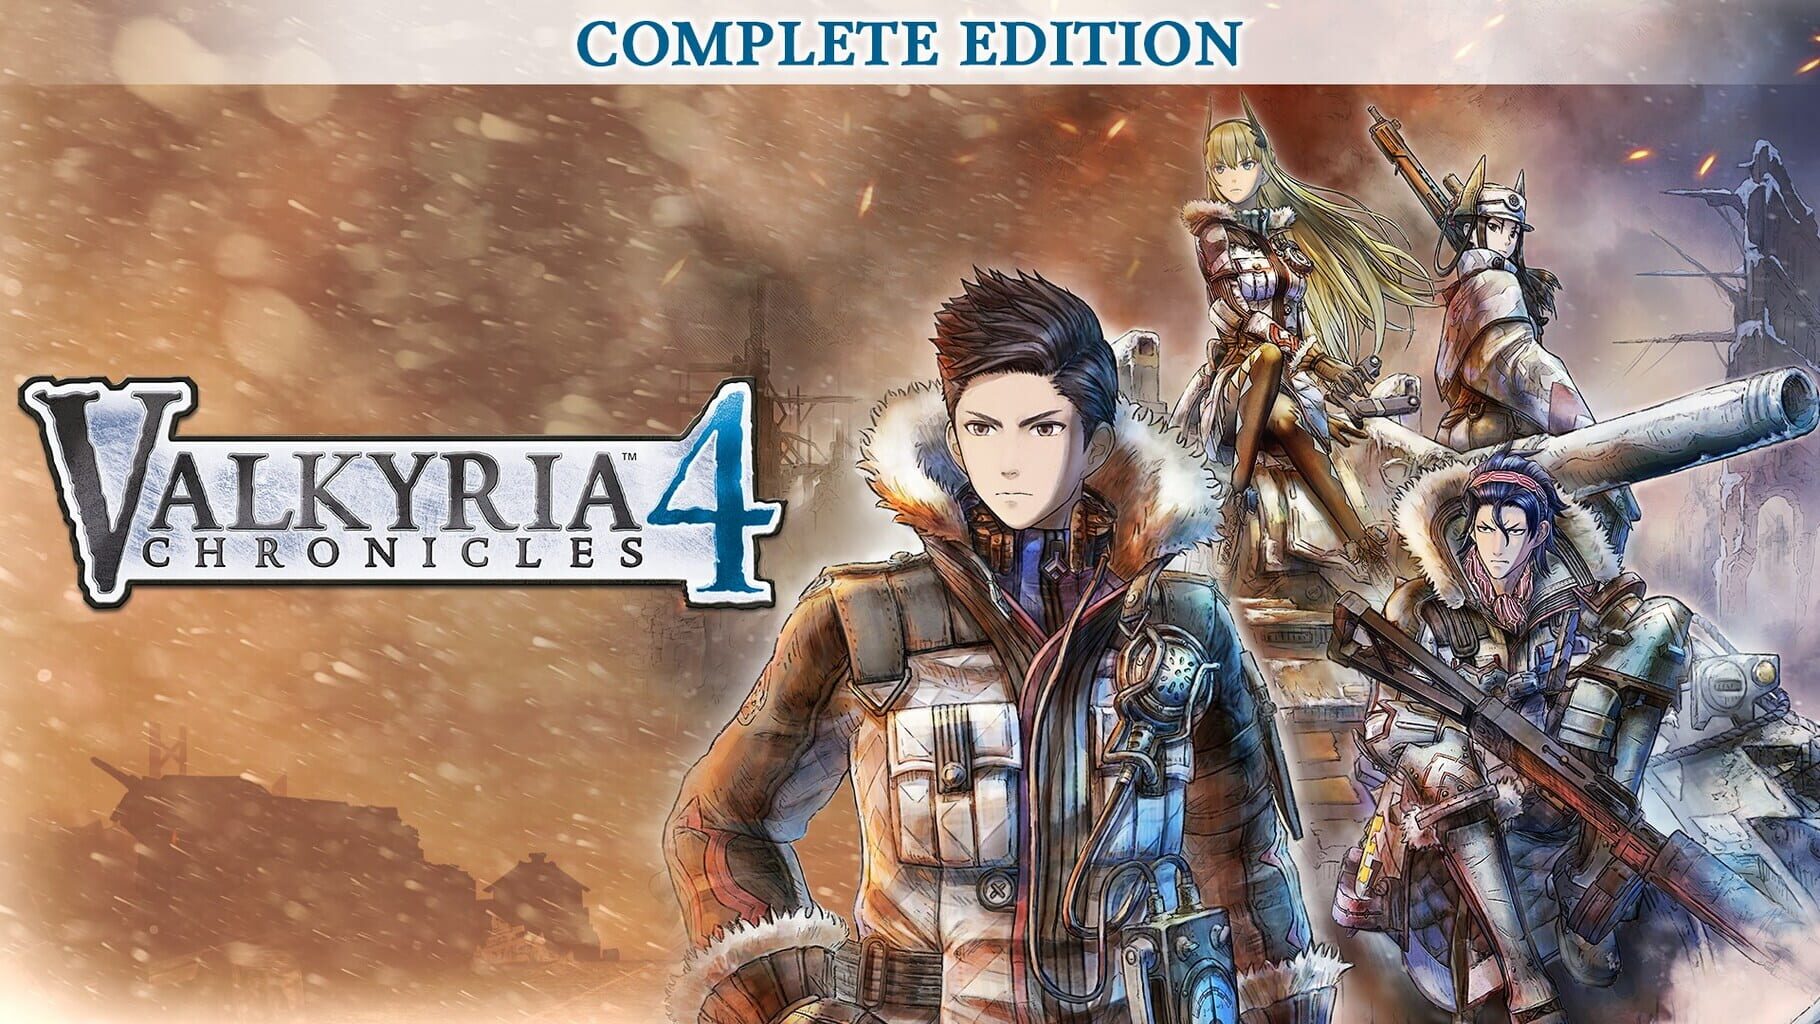 Valkyria Chronicles 4: Complete Edition artwork